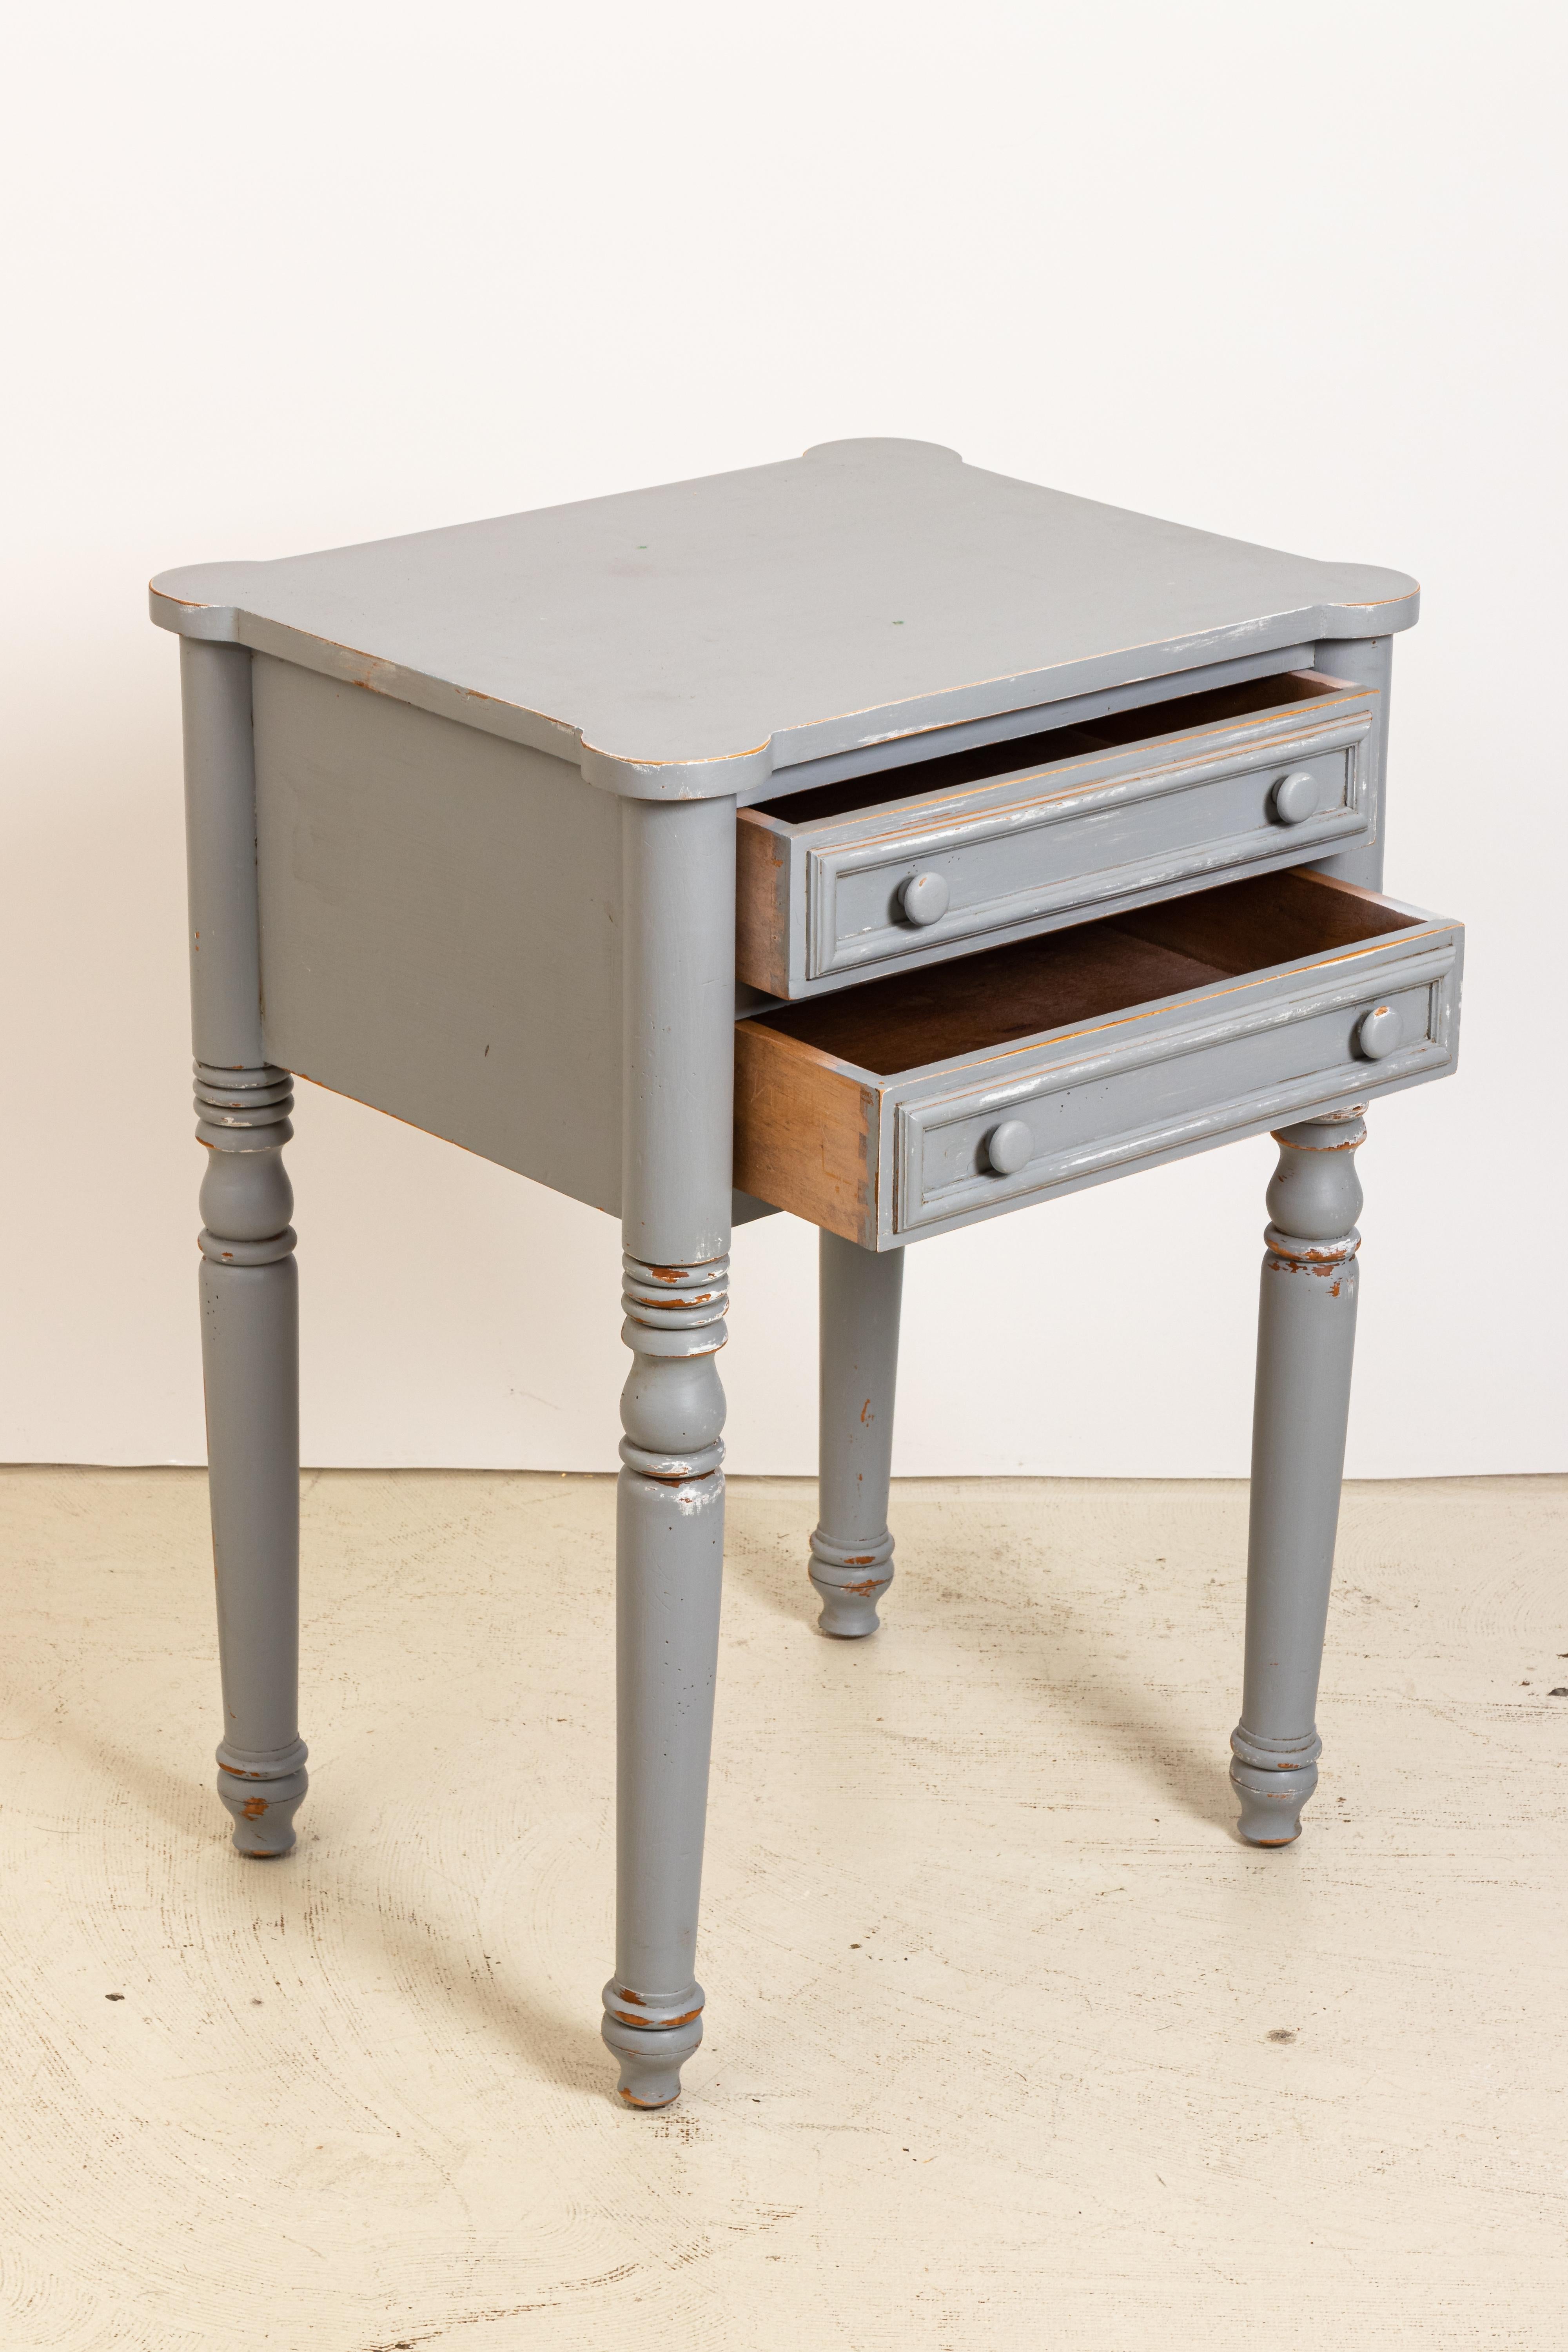 Grey painted two-drawer pine table with cookie cutter corners in a distressed finish, circa 1970s-1980s. Some wear to the painted finish. There is also evidence of finish loss. Made in the United States.